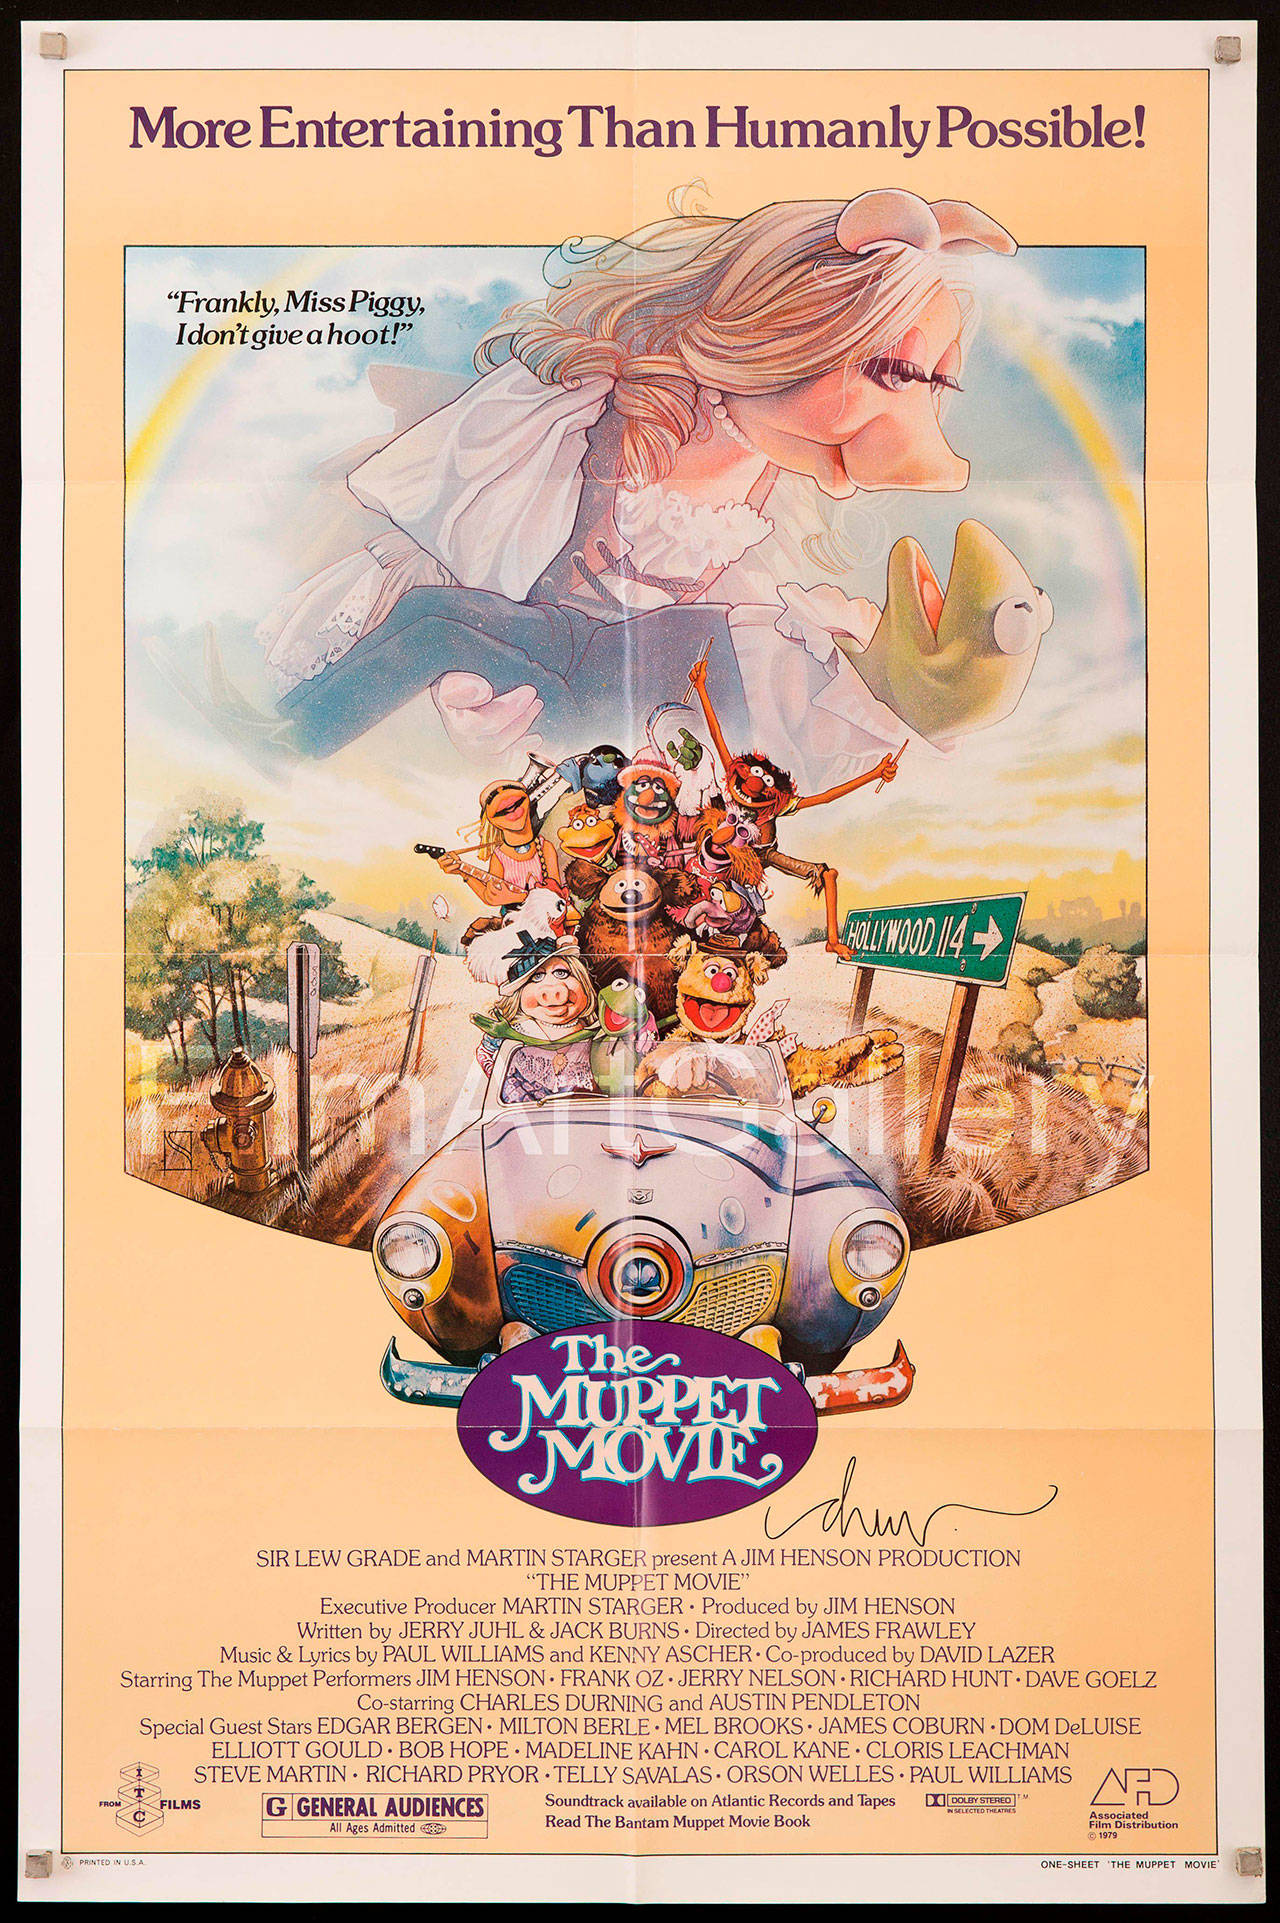 Image courtesy of Associated Film Distribution | “The Muppet Movie” will be screened at Bainbridge Cinemas in honor of the film’s 40th anniversary at 7 p.m. Thursday, July 25.